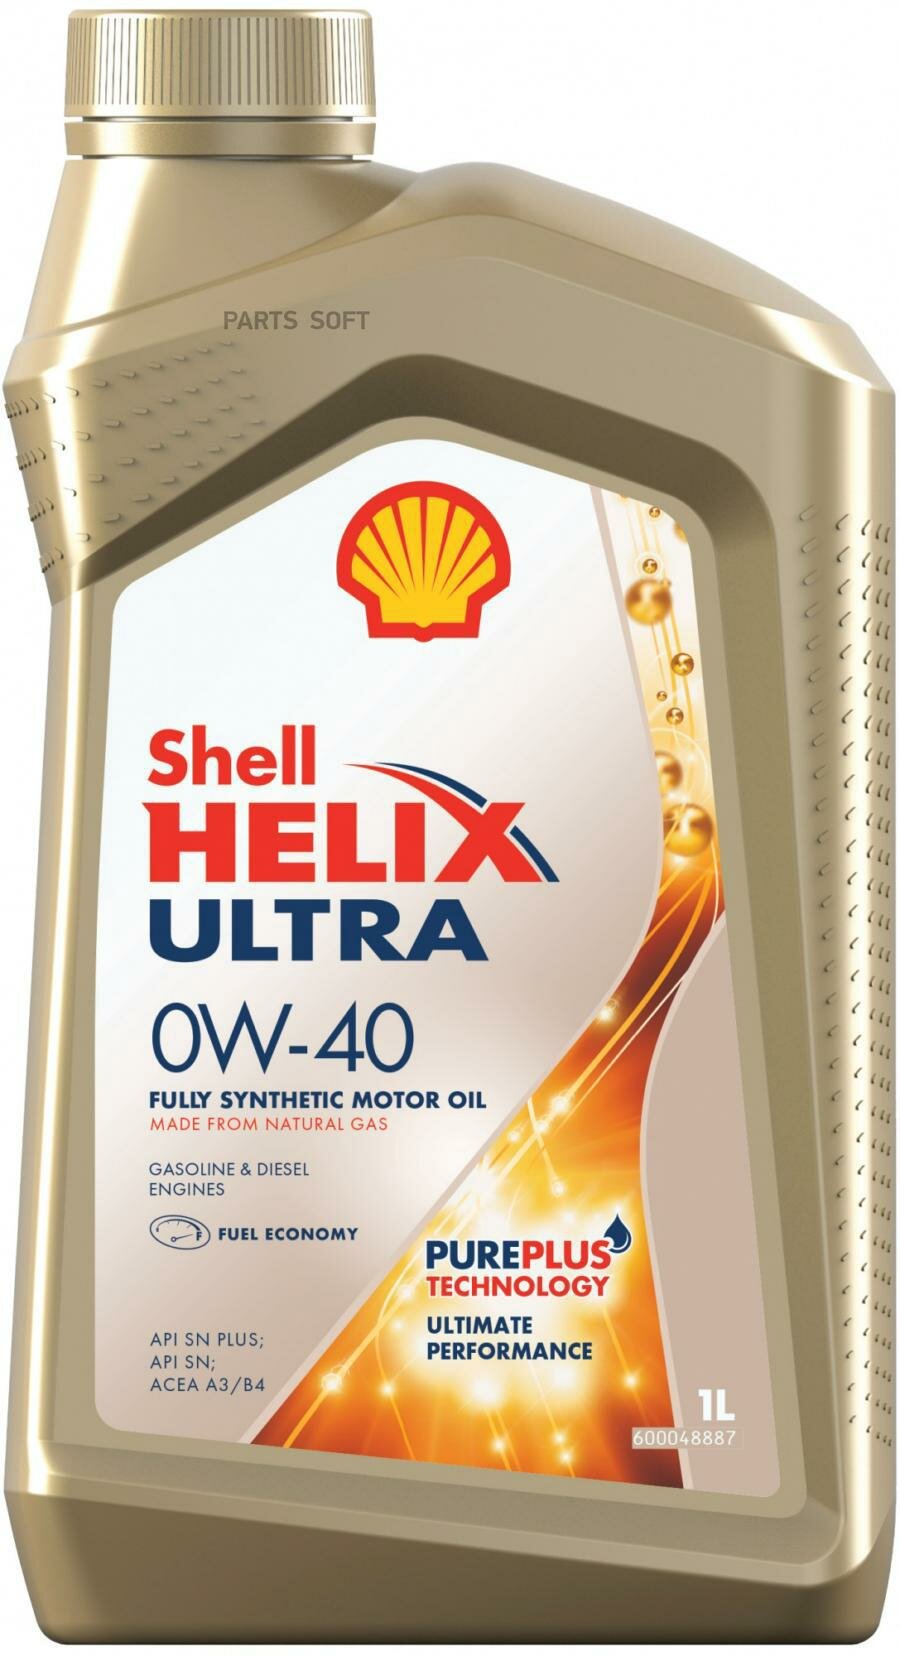 SHELL 550051577 Масо моторное SHELL Helix Ultra 0W-40 1.